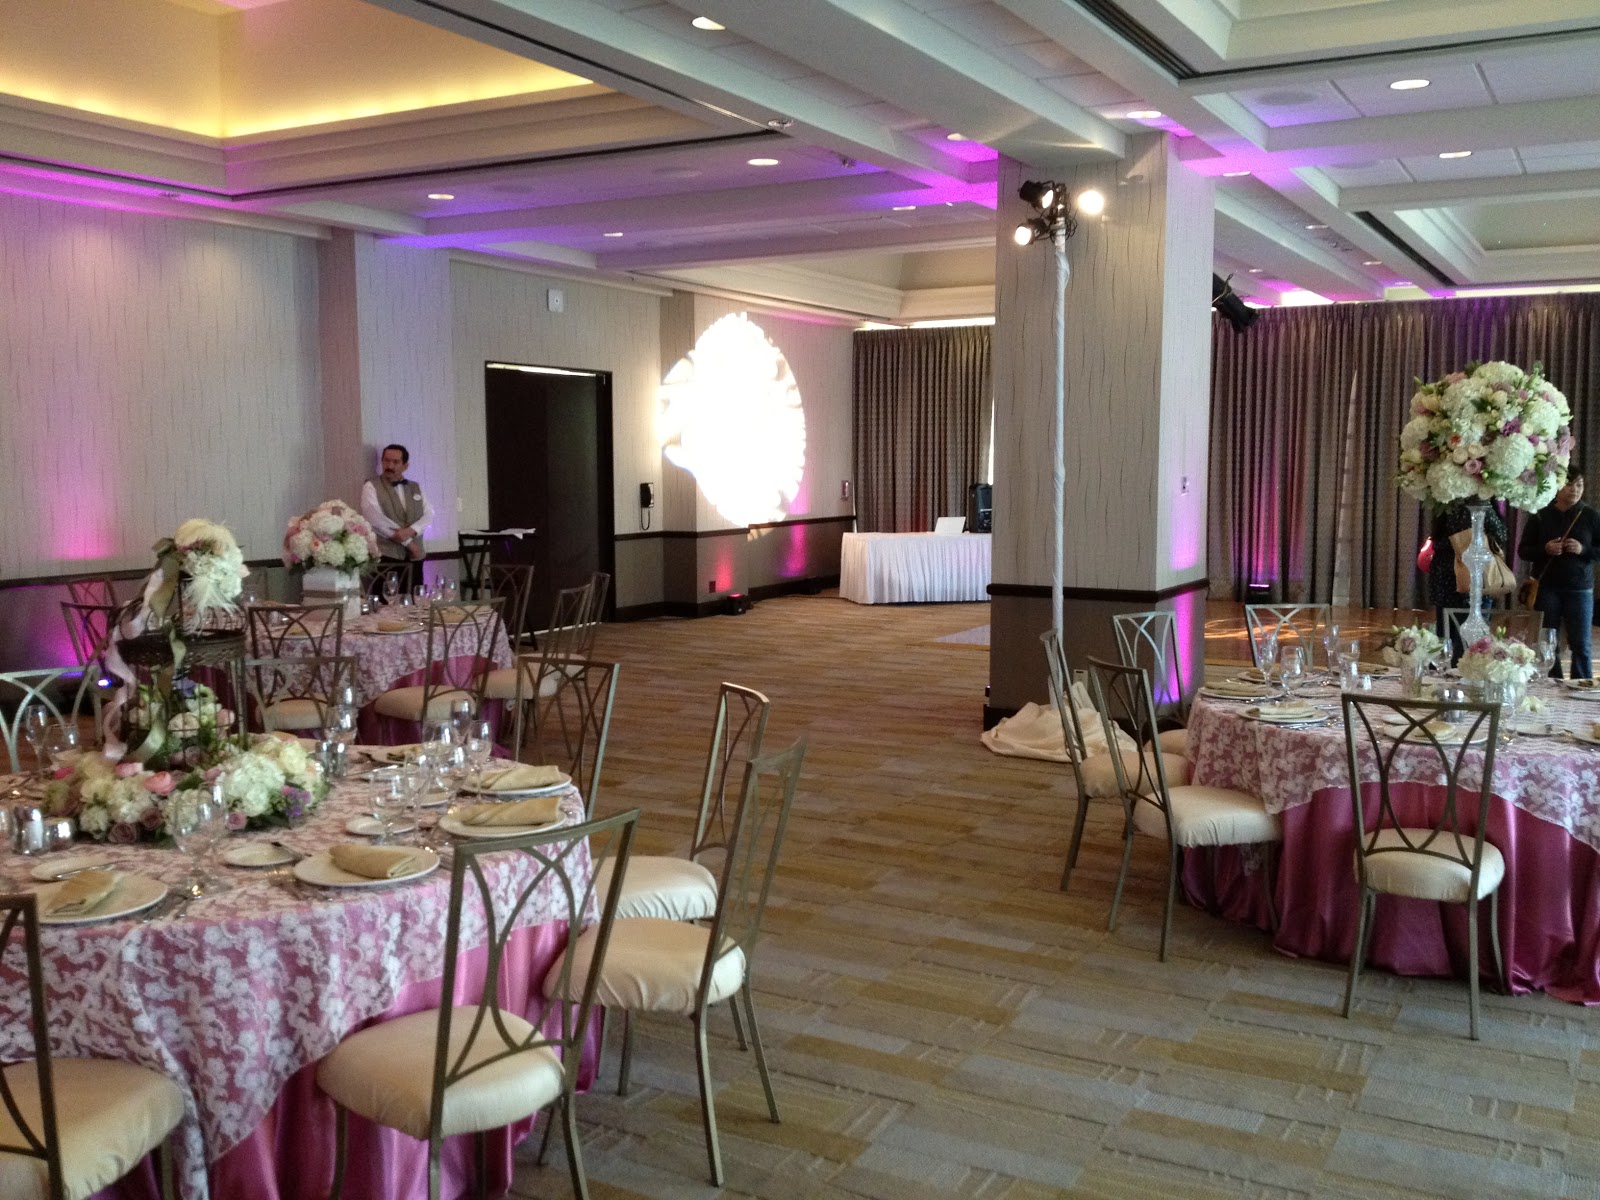 Wide view of Mark Twain Room decorated for a wedding